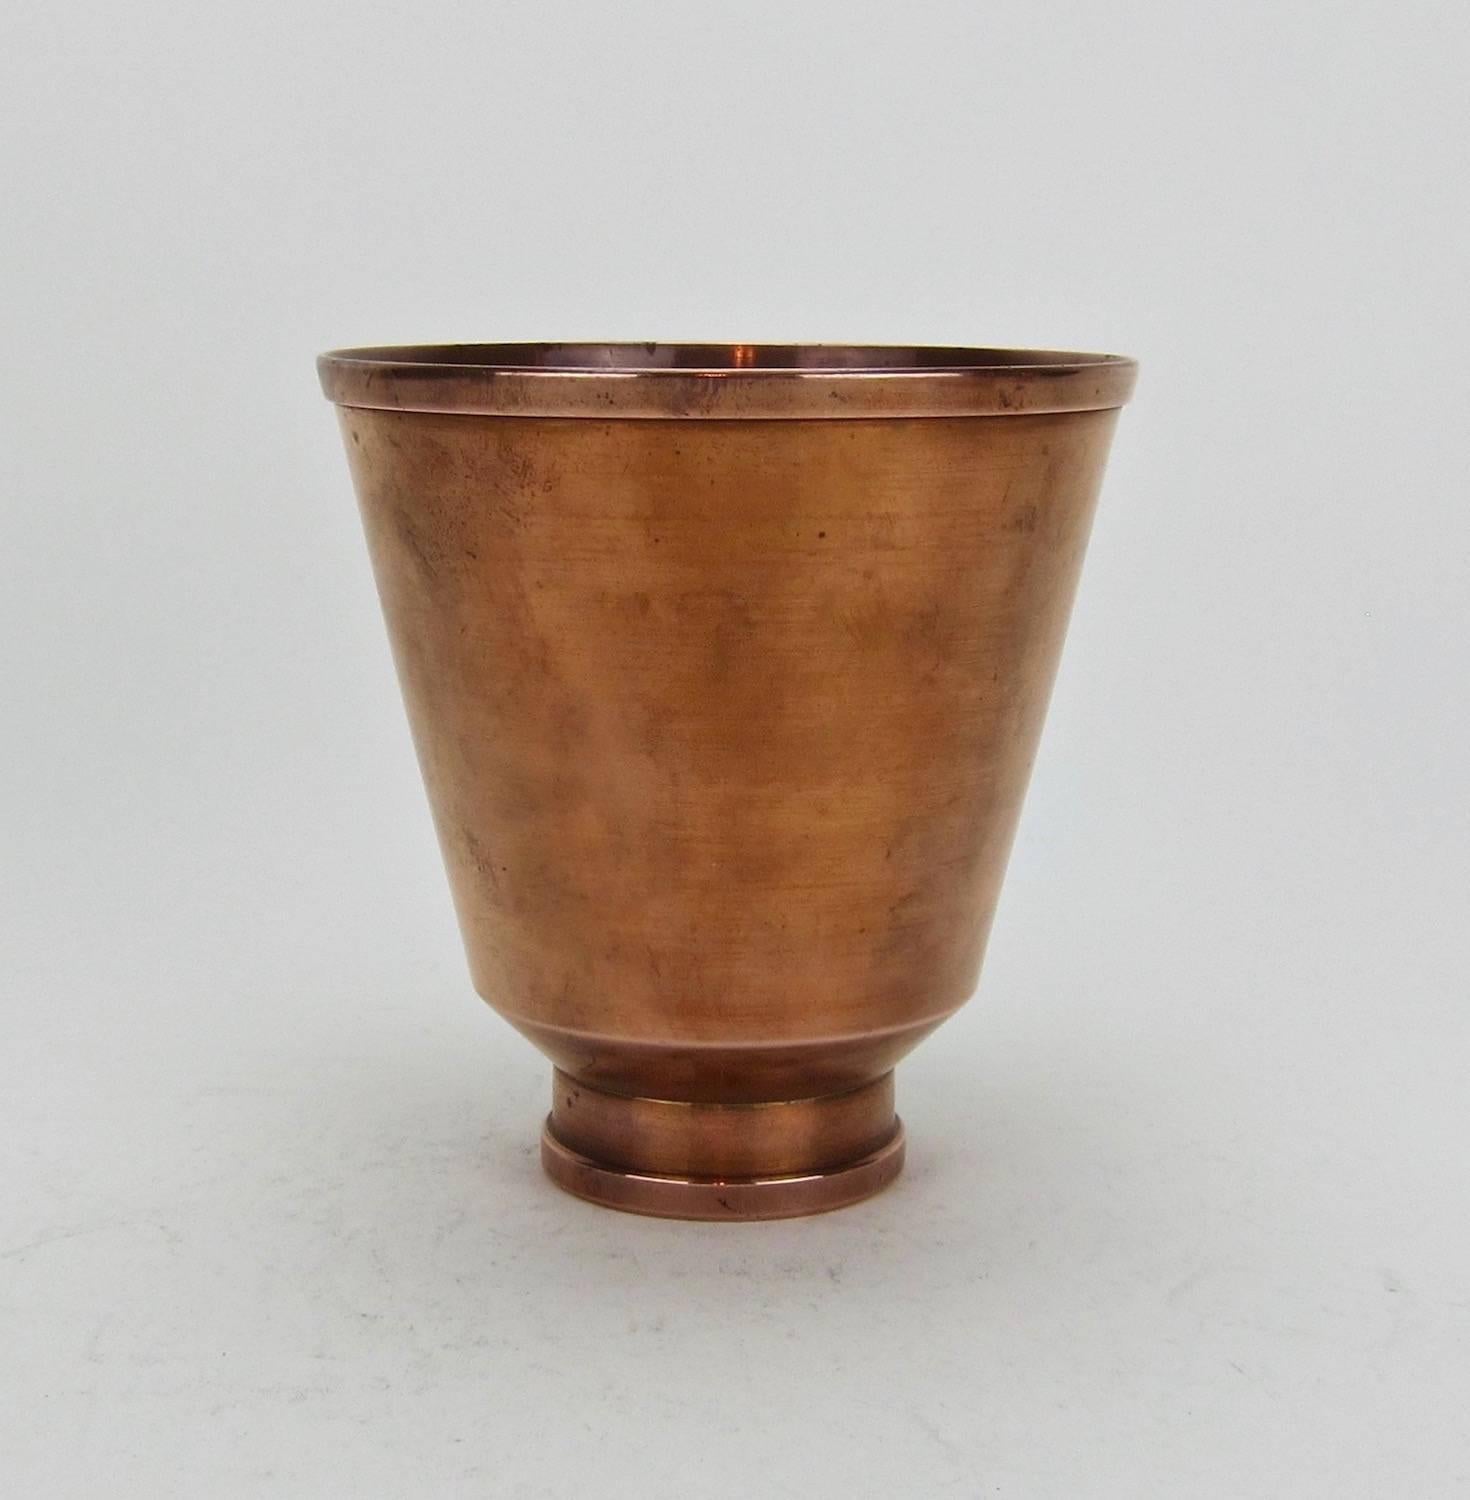 An antique Arts and Crafts era flaring vase in spun copper resting on a ring foot by Marie Zimmermann (1879-1972), a noted American metalsmith, jeweler and designer active during the opening decades of the 20th century. The vase comes from the